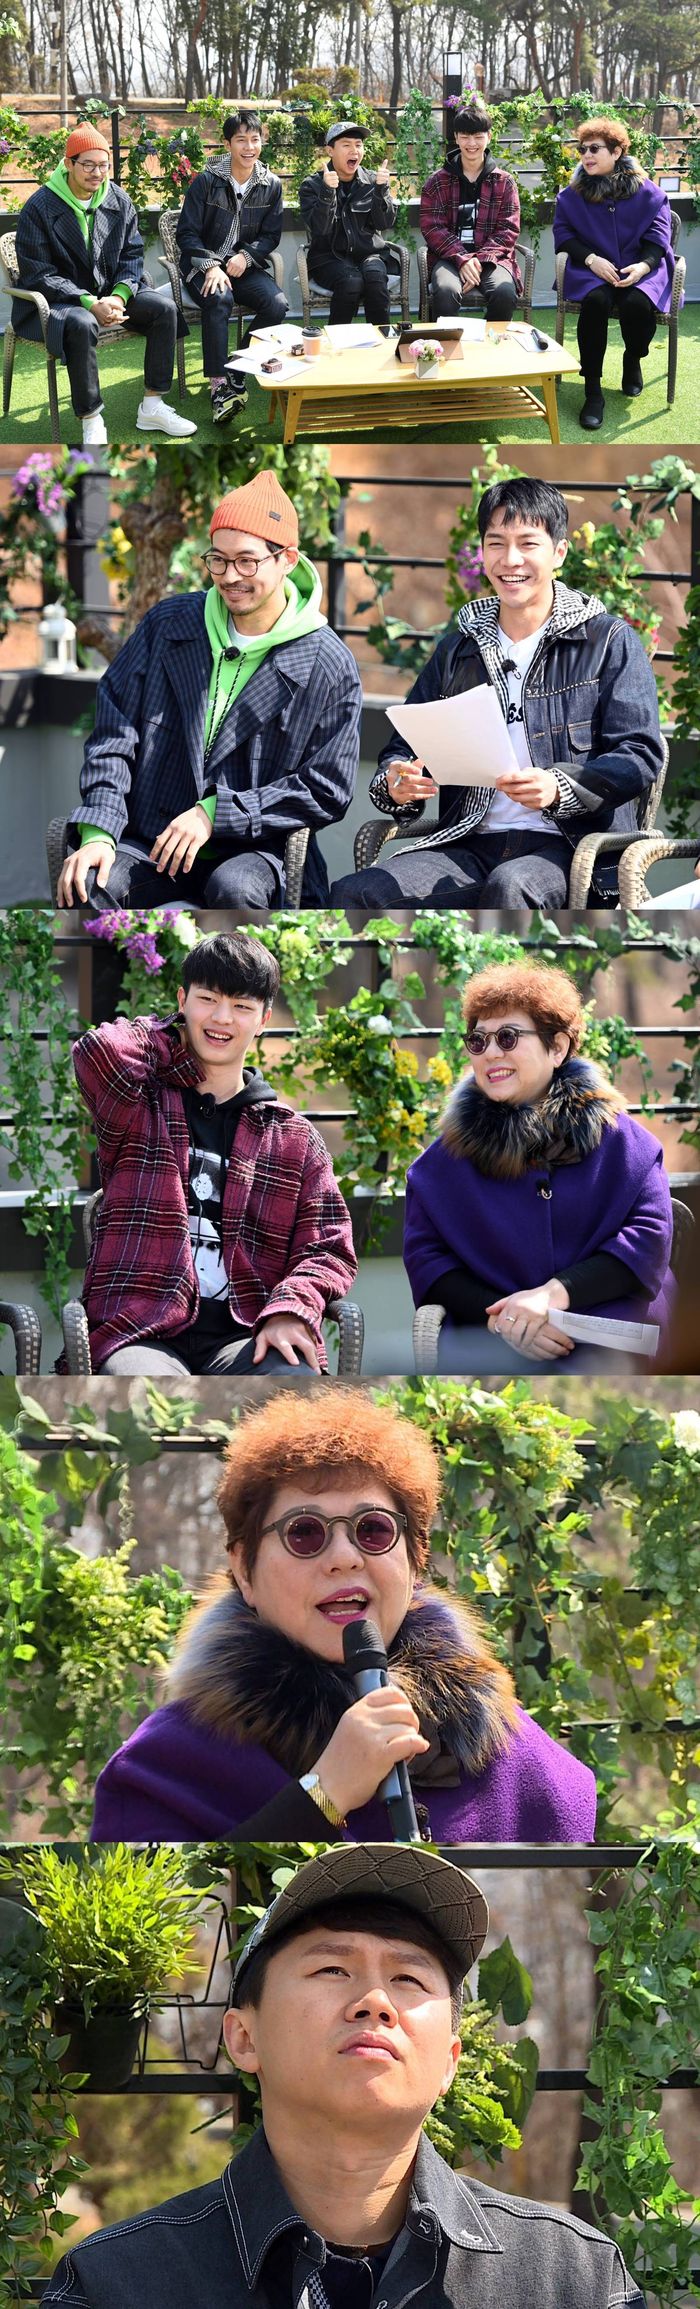 SBS All The Butlers Lee Seung-gi, Lee Sang-yoon, Yang Se-hyung, and Yang Sung-jae were the Top Model on live radio.All The Butlers, which is broadcasted at 6:25 pm on the 14th, will show members of Top Model on live radio.Master Yang Hee-eun announced a surprise mission to the members, saying, Lets do live radio.The members who were embarrassed by the words of live broadcasting were afraid that they were showing and living broadcasting.On the other hand, Yang Hee-eun said, I rather like the live broadcast with time like a knife.Unlike the members who finally started live broadcasting and made mistakes (?), Yang Hee-eun showed a proficient progress and impressed everyone.On the other hand, the members who were broadcasting the radio live showed tears.Yang Hee-eun sang for listeners, and the members who listened to it were tearful, saying, I can not cry, and I can cry even if I listen.Not only the members but also the people on the scene started to cry, and eventually the film was a tearful sea.The members live radio Top Model can be found on All The Butlers broadcasted at 6:25 pm on the 14th (Sunday).